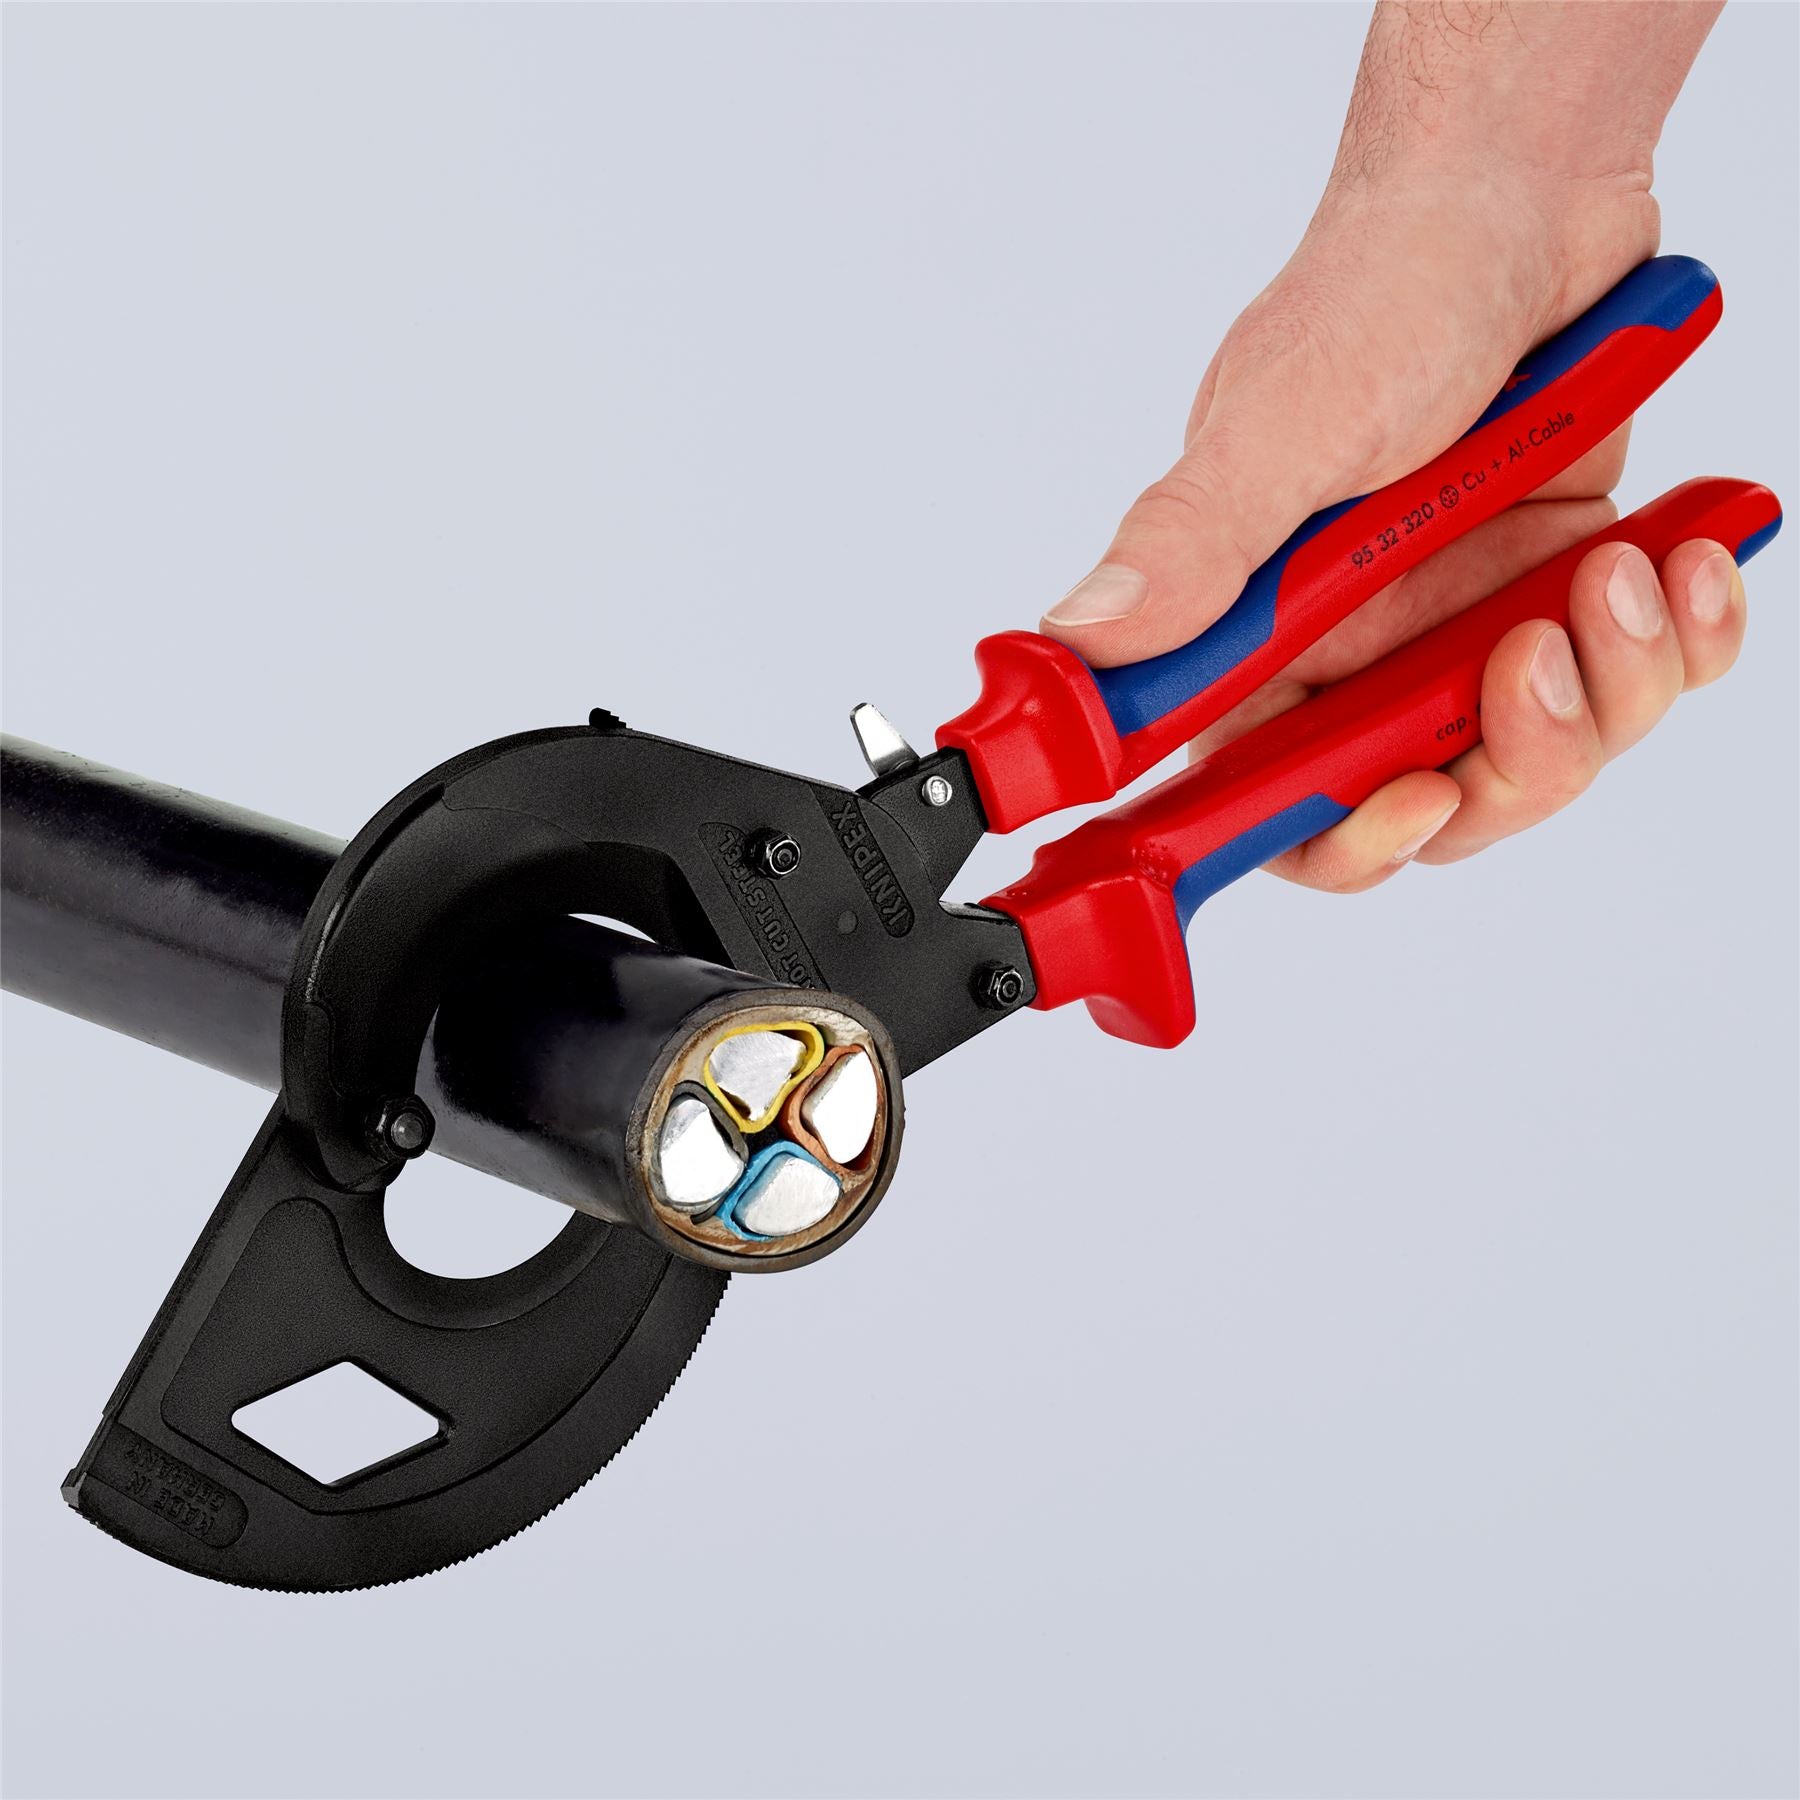 KNIPEX Cable Cutter Ratchet Action 3 Stage 60mm Diameter Cutting Capacity 320mm Multi Component Grips 95 32 320